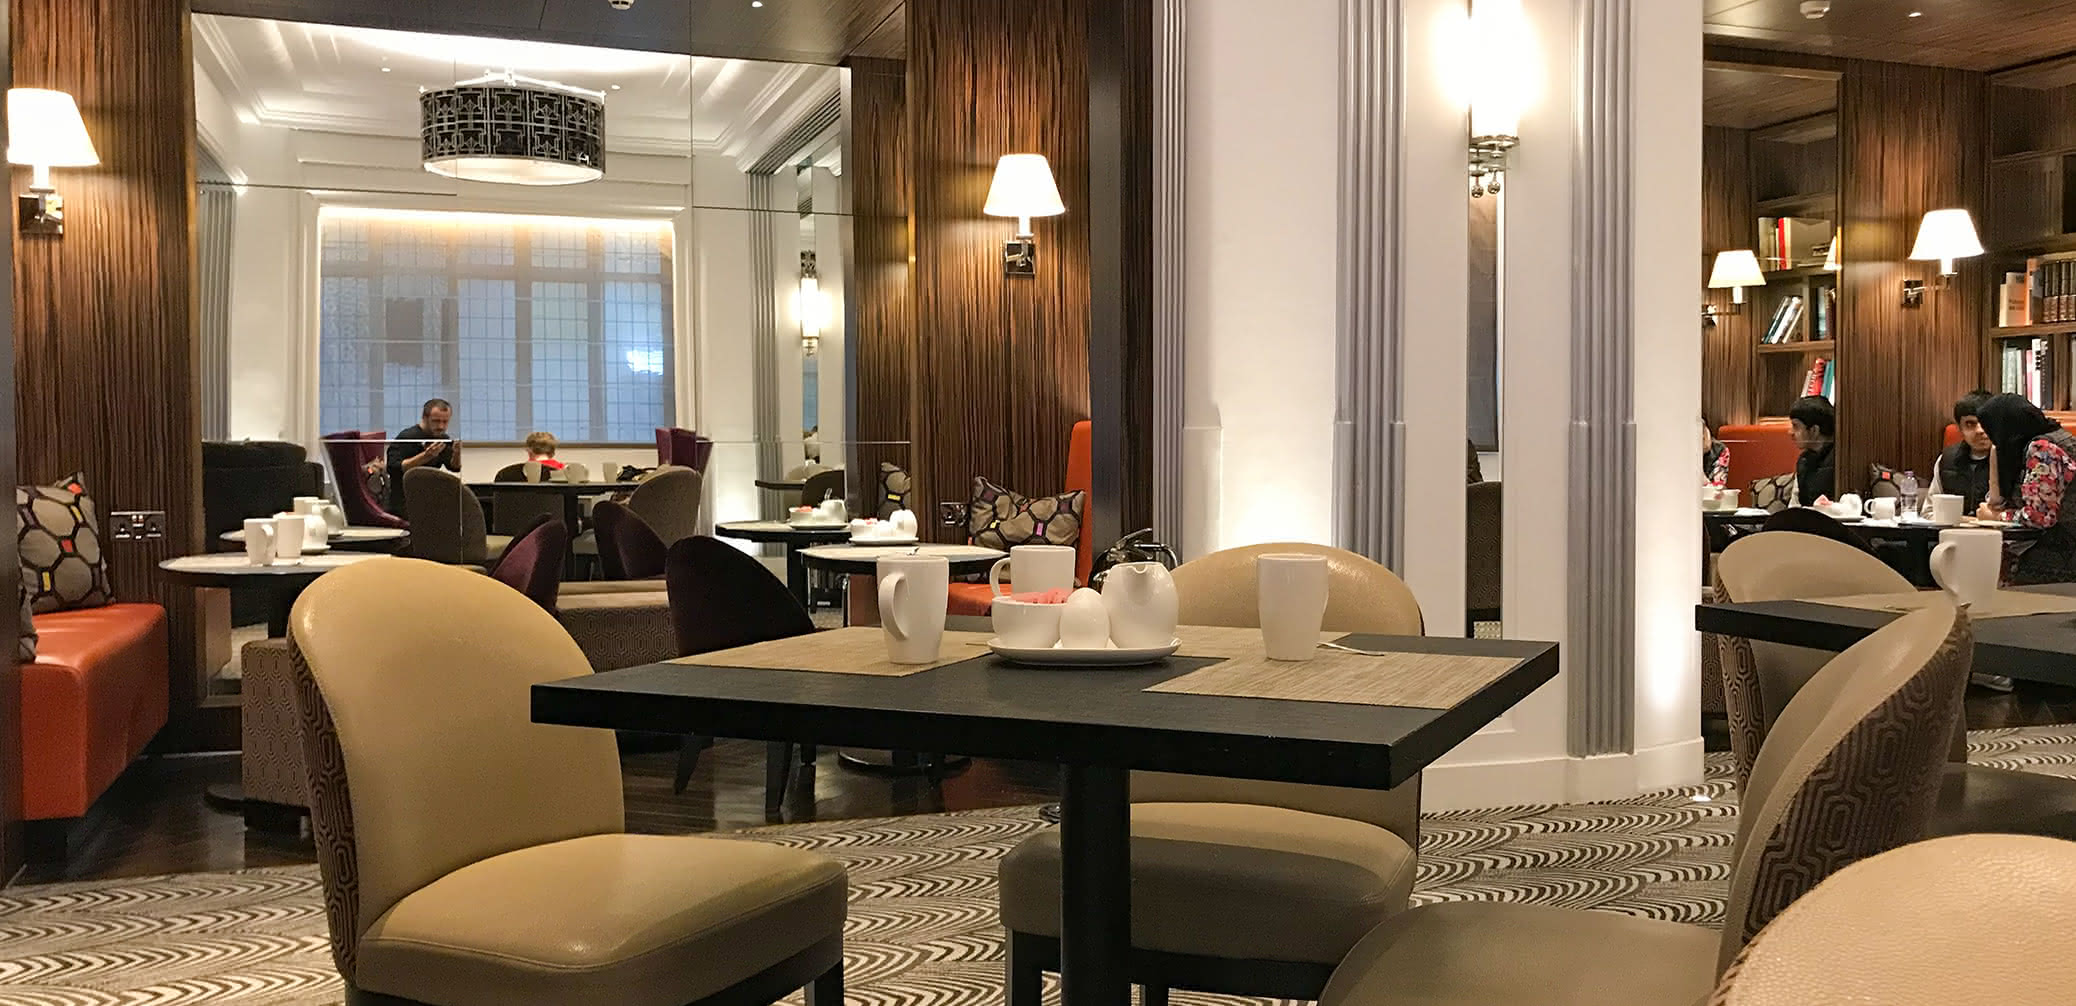 How To Get A Free Upgrade To Club Level Lounge At Ritz-Carlton Hotels